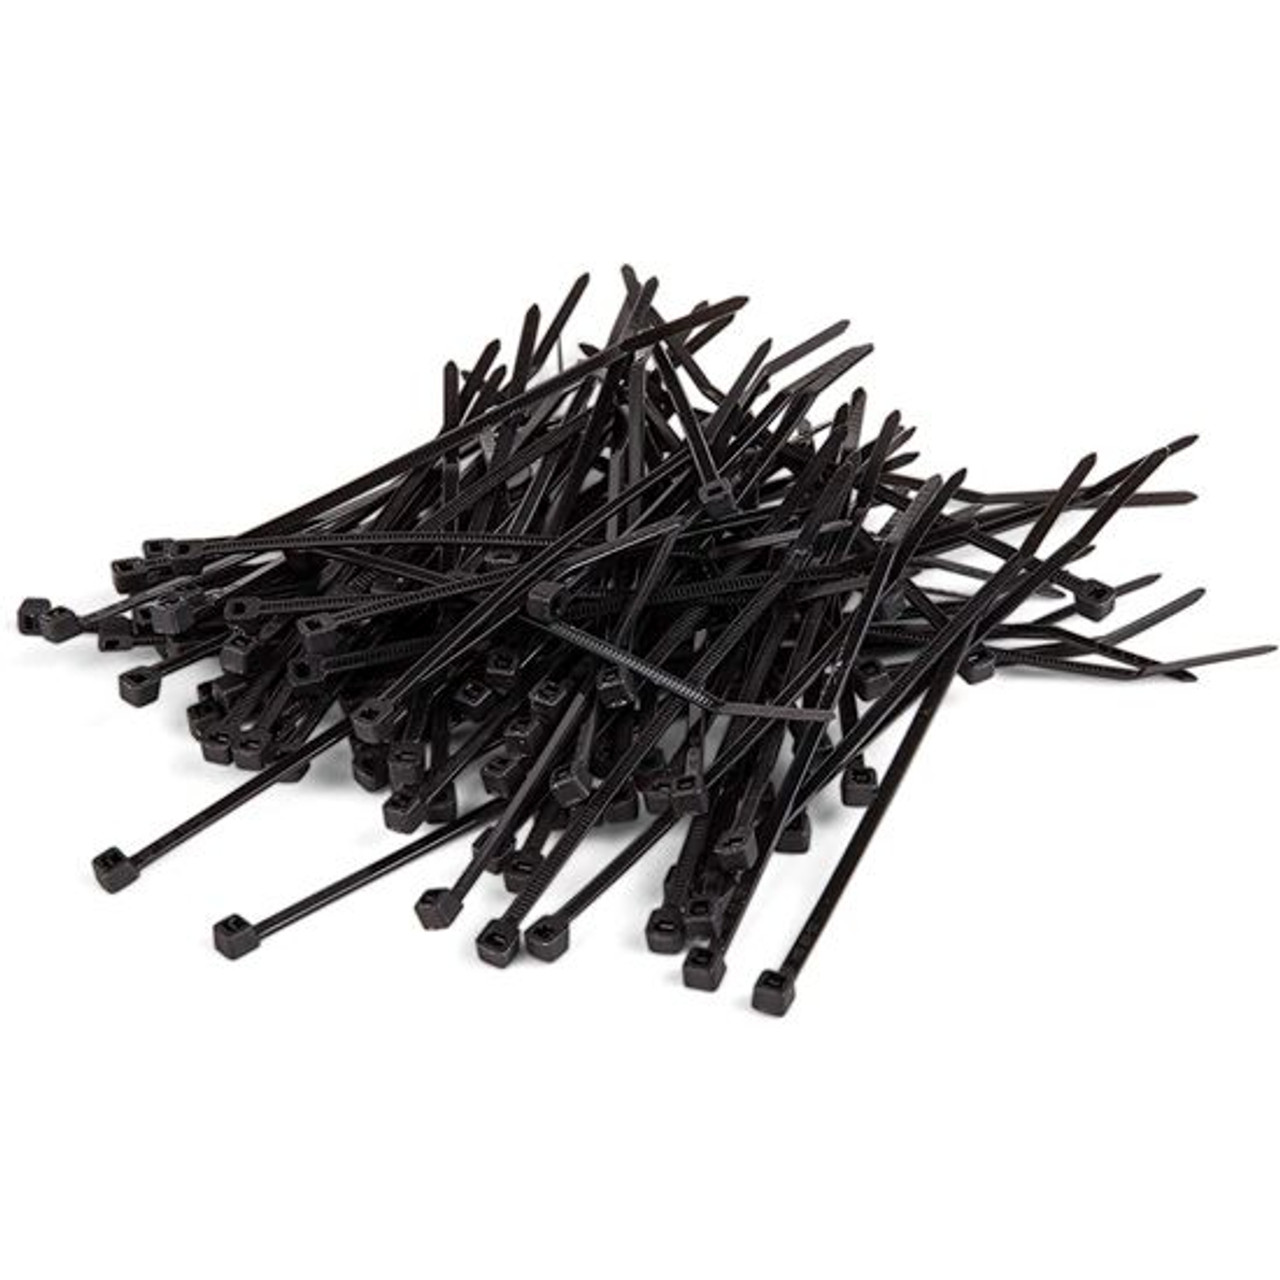 Steren 400-804BK Cable Ties Black 4" Inch 100 Pack Lot 18 Lbs Virgin Nylon Self-Locking Cable Zip Wire Ties Quick Bundle Easy Lock Straps Telephone Cat 5e Data Line Organizer, Part # 400804-BK